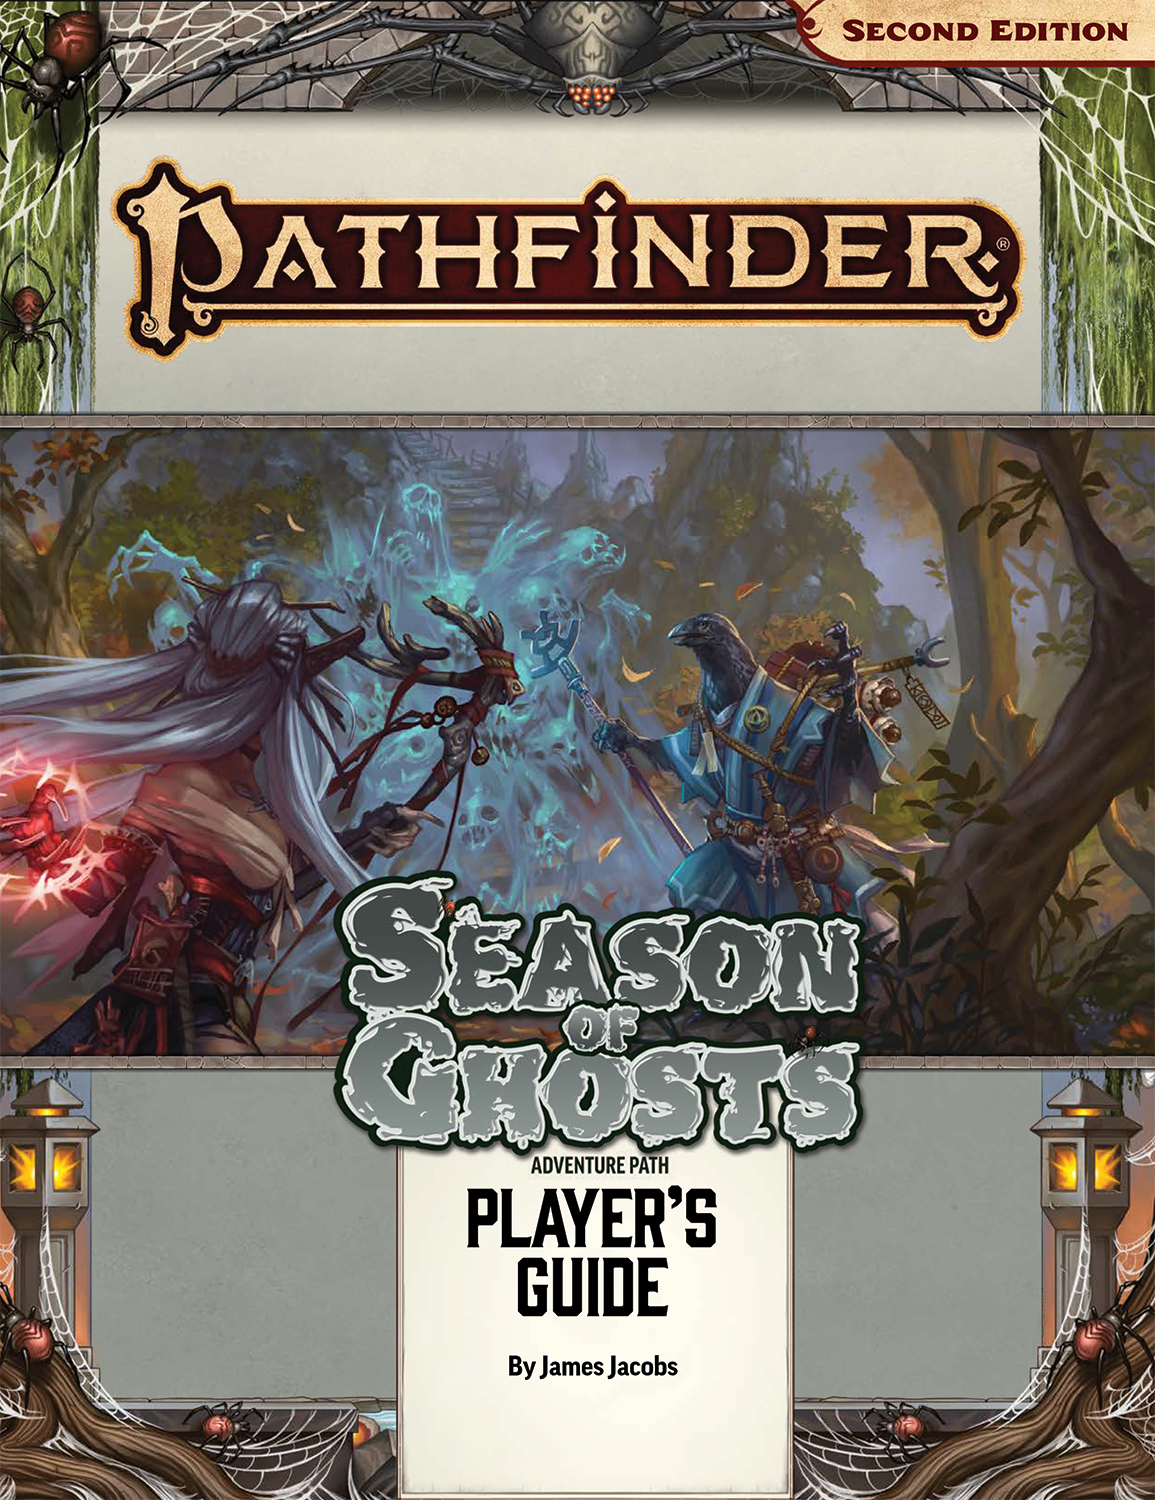 Pathfinder Second Edition Season of Ghosts Adventure Path Player's Guide